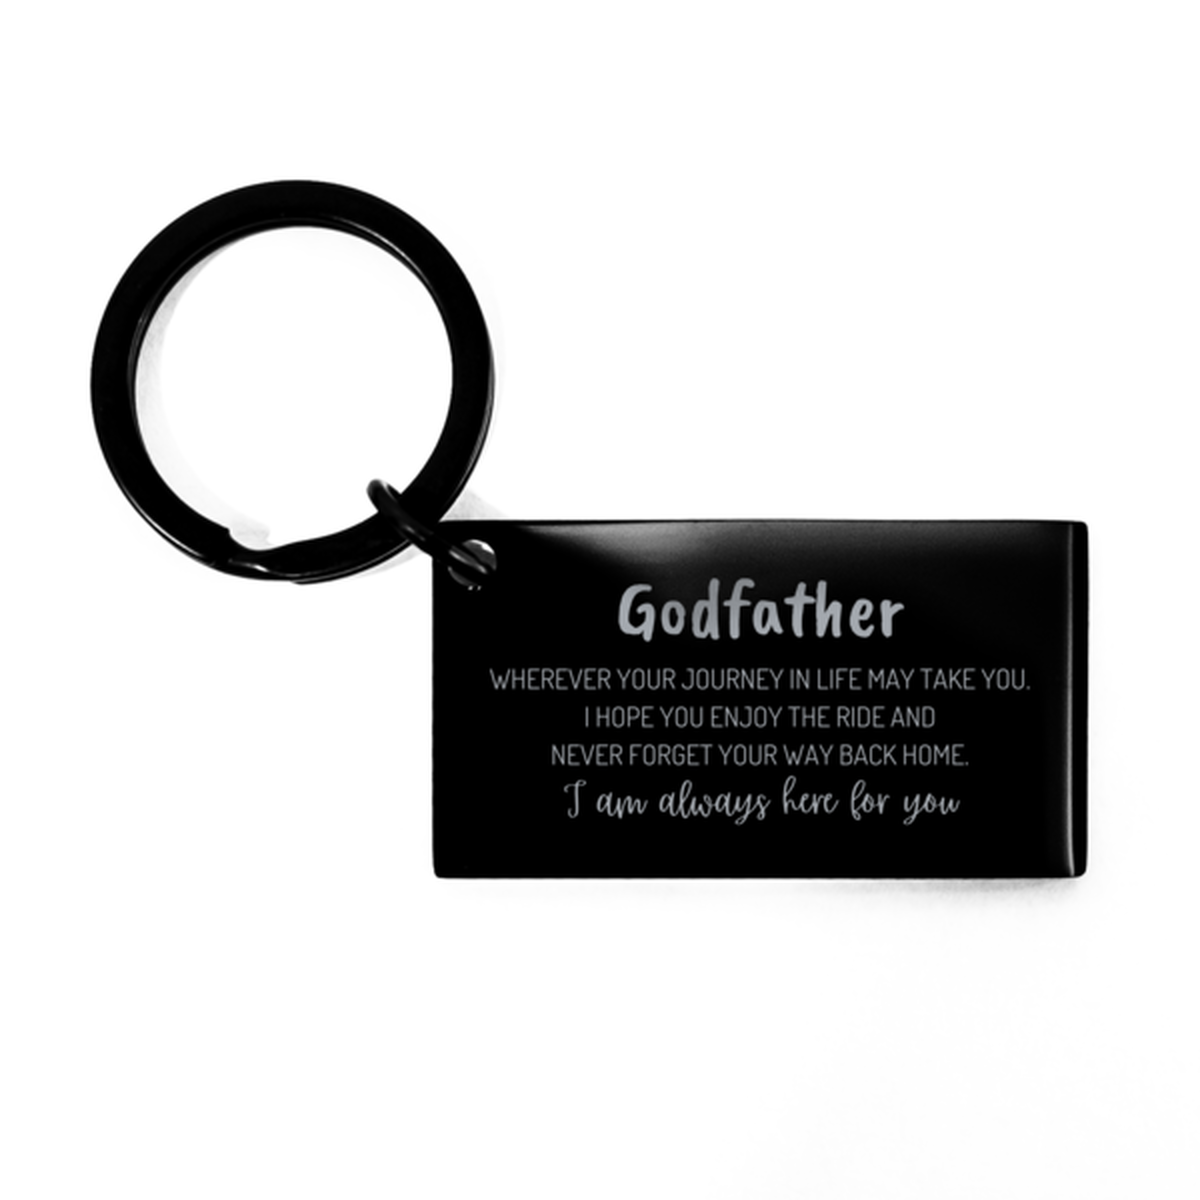 Godfather wherever your journey in life may take you, I am always here for you Godfather Keychain, Awesome Christmas Gifts For Godfather, Godfather Birthday Gifts for Men Women Family Loved One